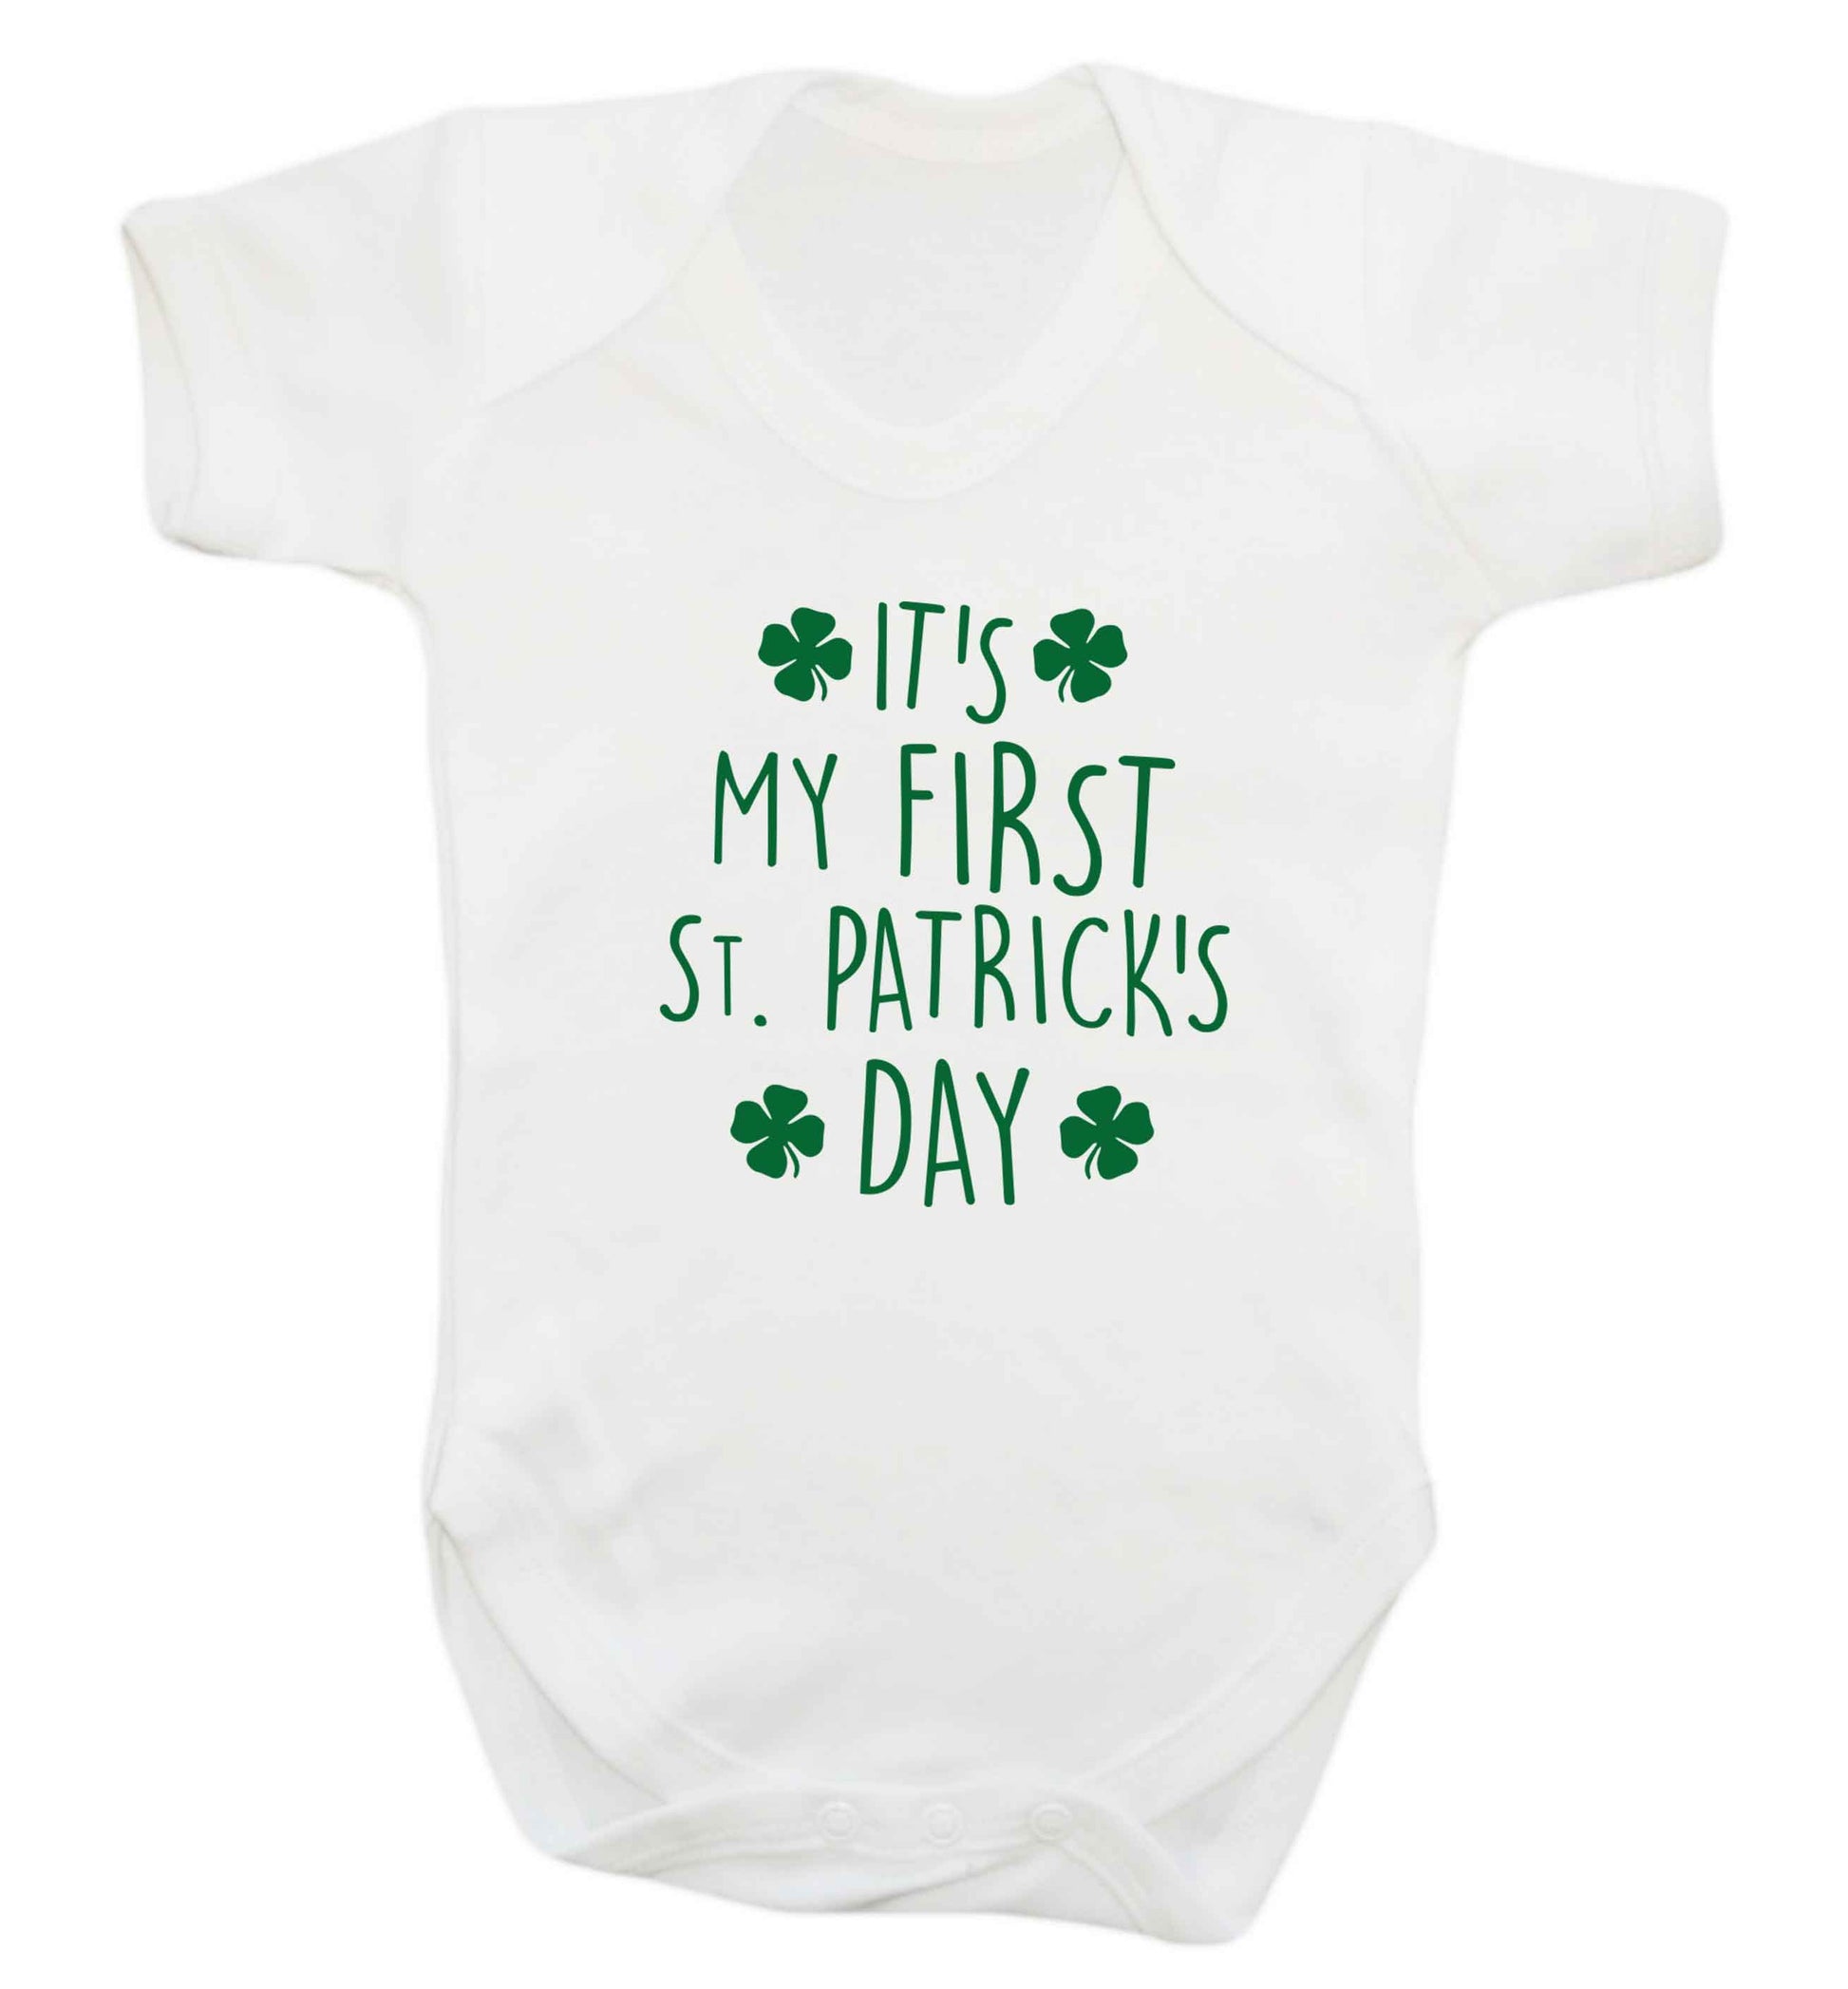 It's my first St.Patrick's day baby vest white 18-24 months